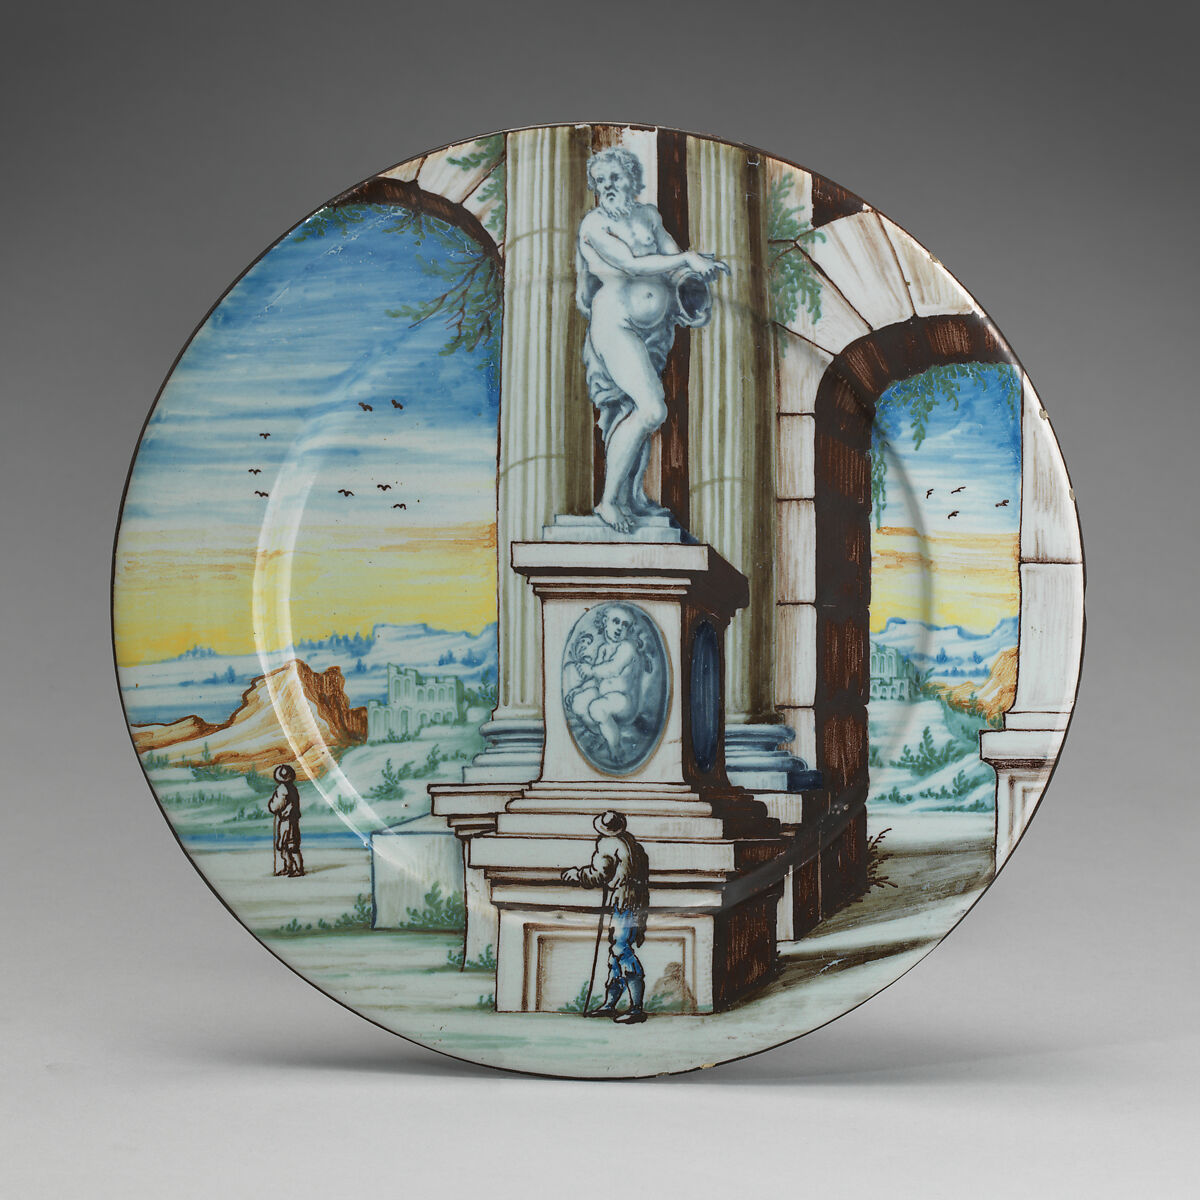 Dish with landscape and architectural ruins, Painted by Siro Antonio Africa (Italian, 1663–ca. 1735), Tin-glazed earthenware (maiolica), Italian, Pavia 